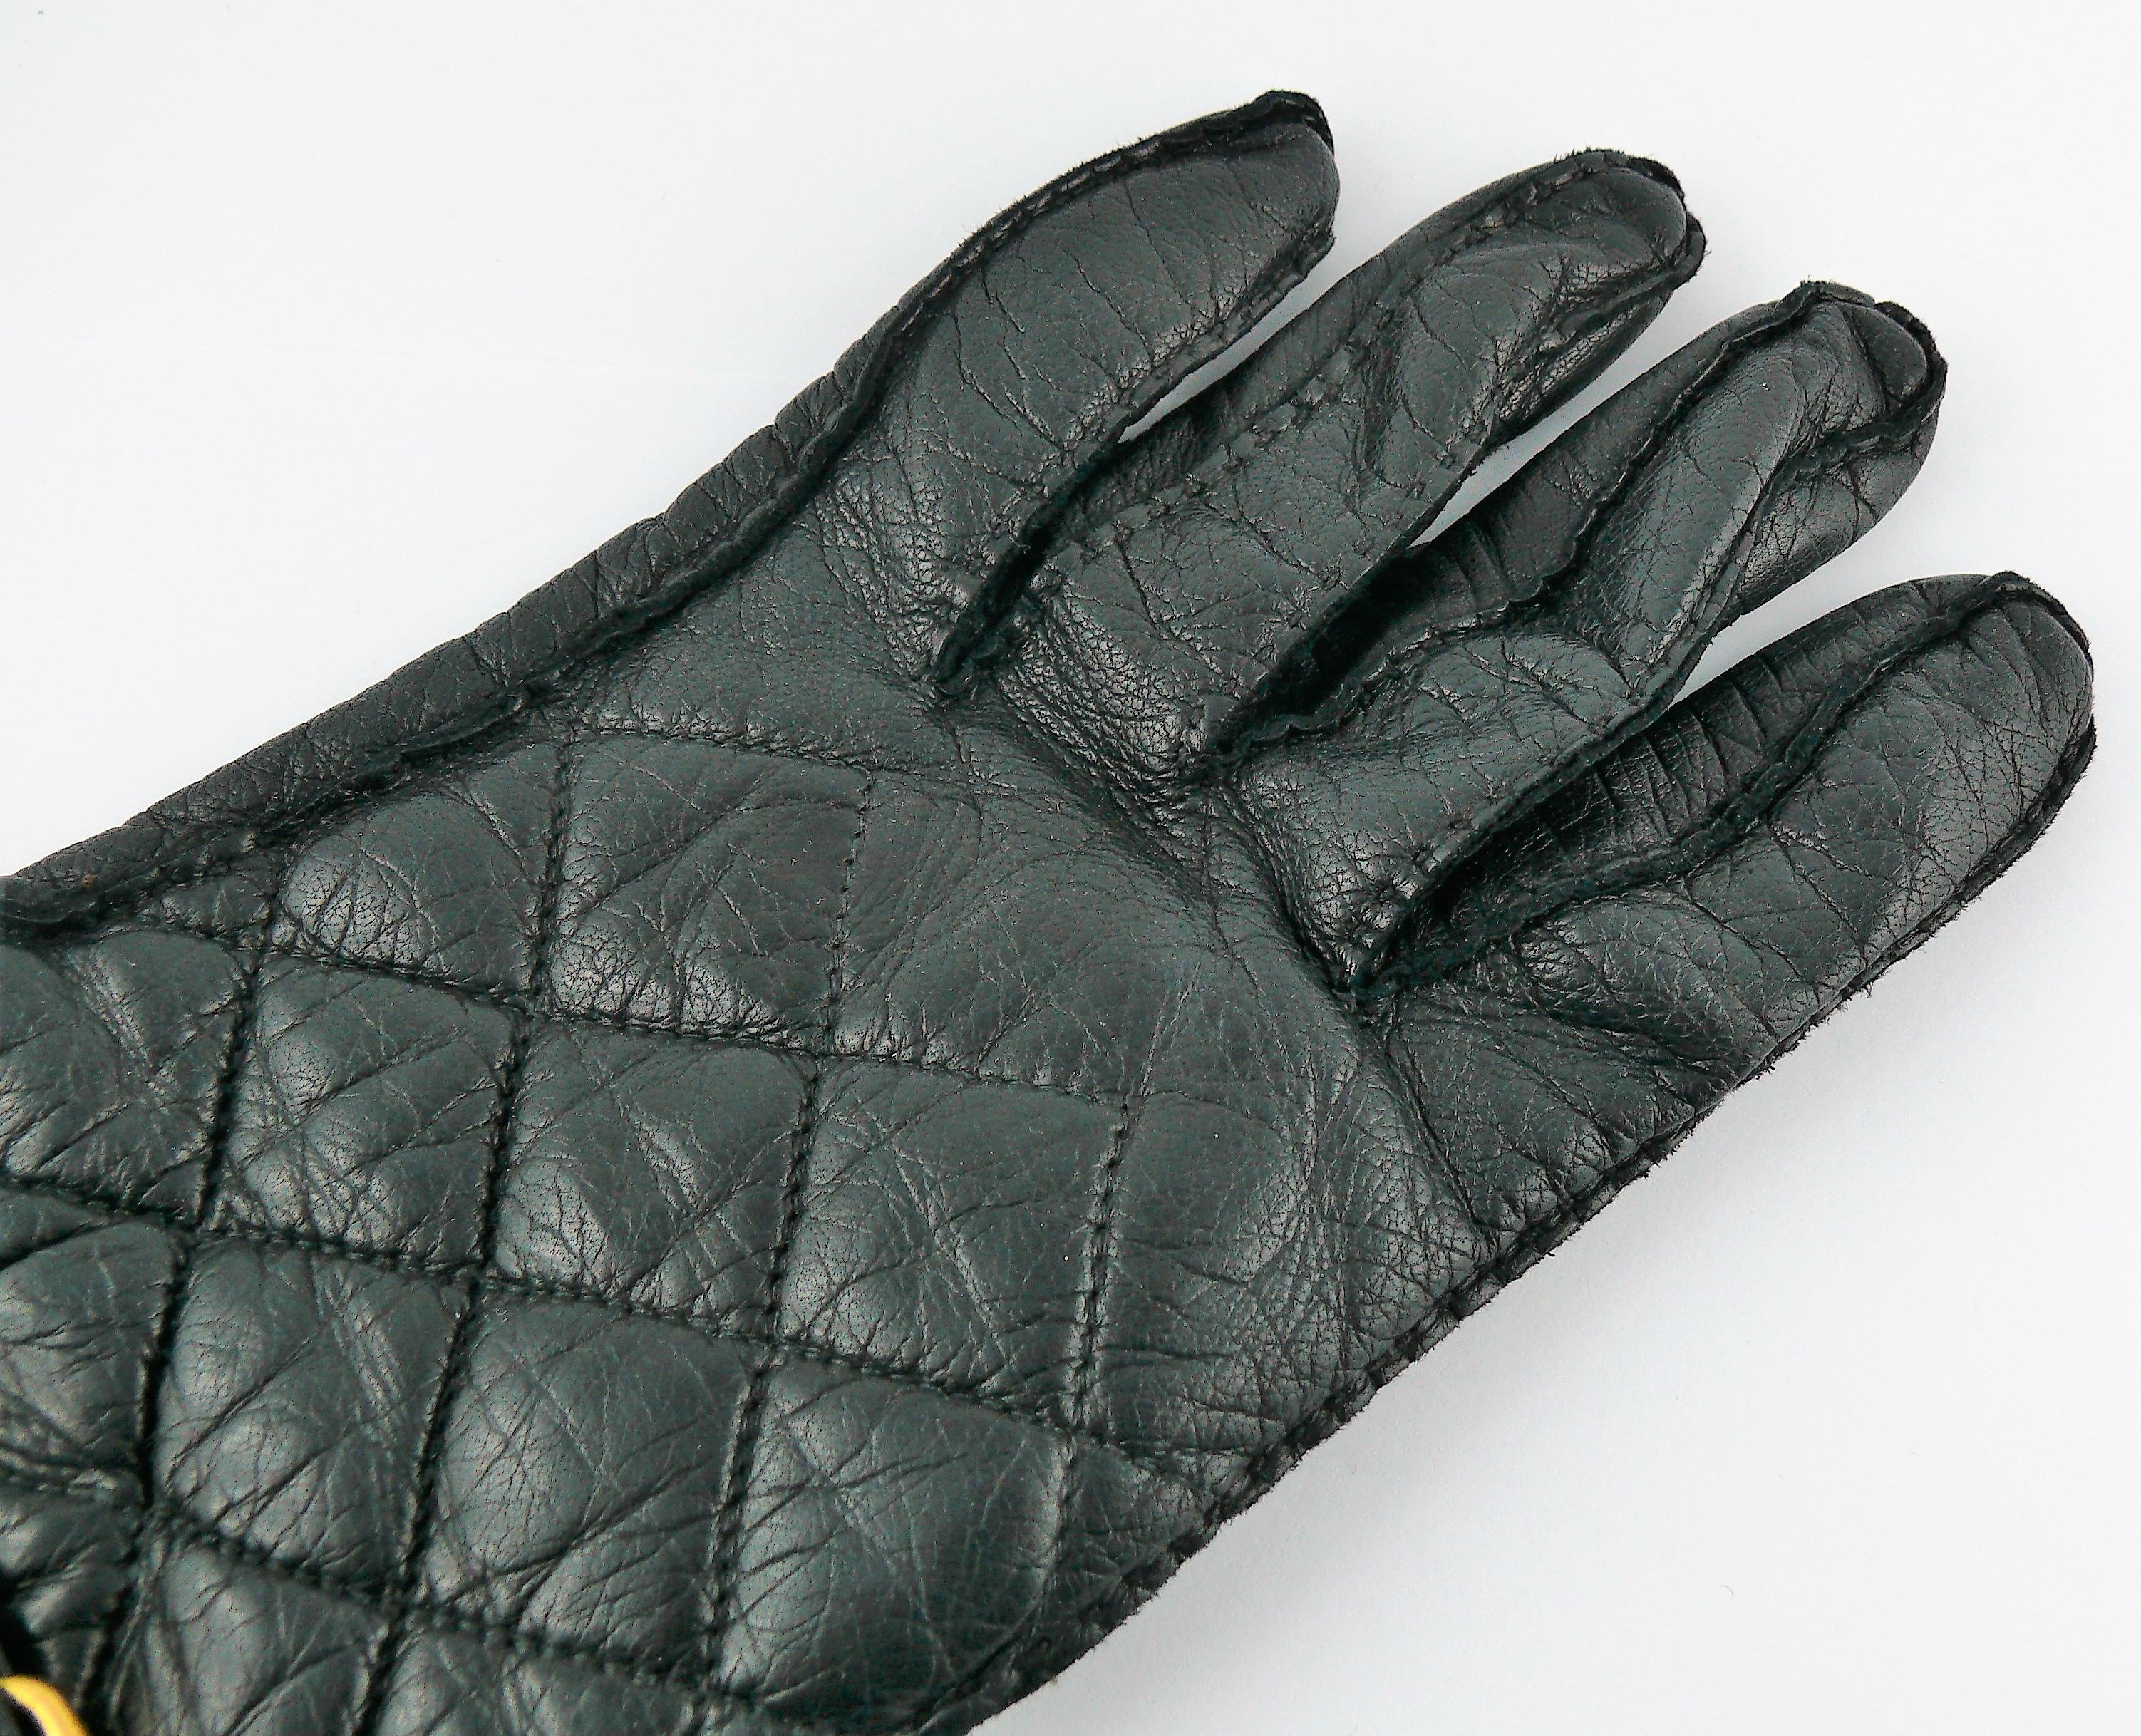 Chanel Vintage Iconic Black Quilted Kidskin Leather Rue Cambon Gloves Size 7 1/2 For Sale 3